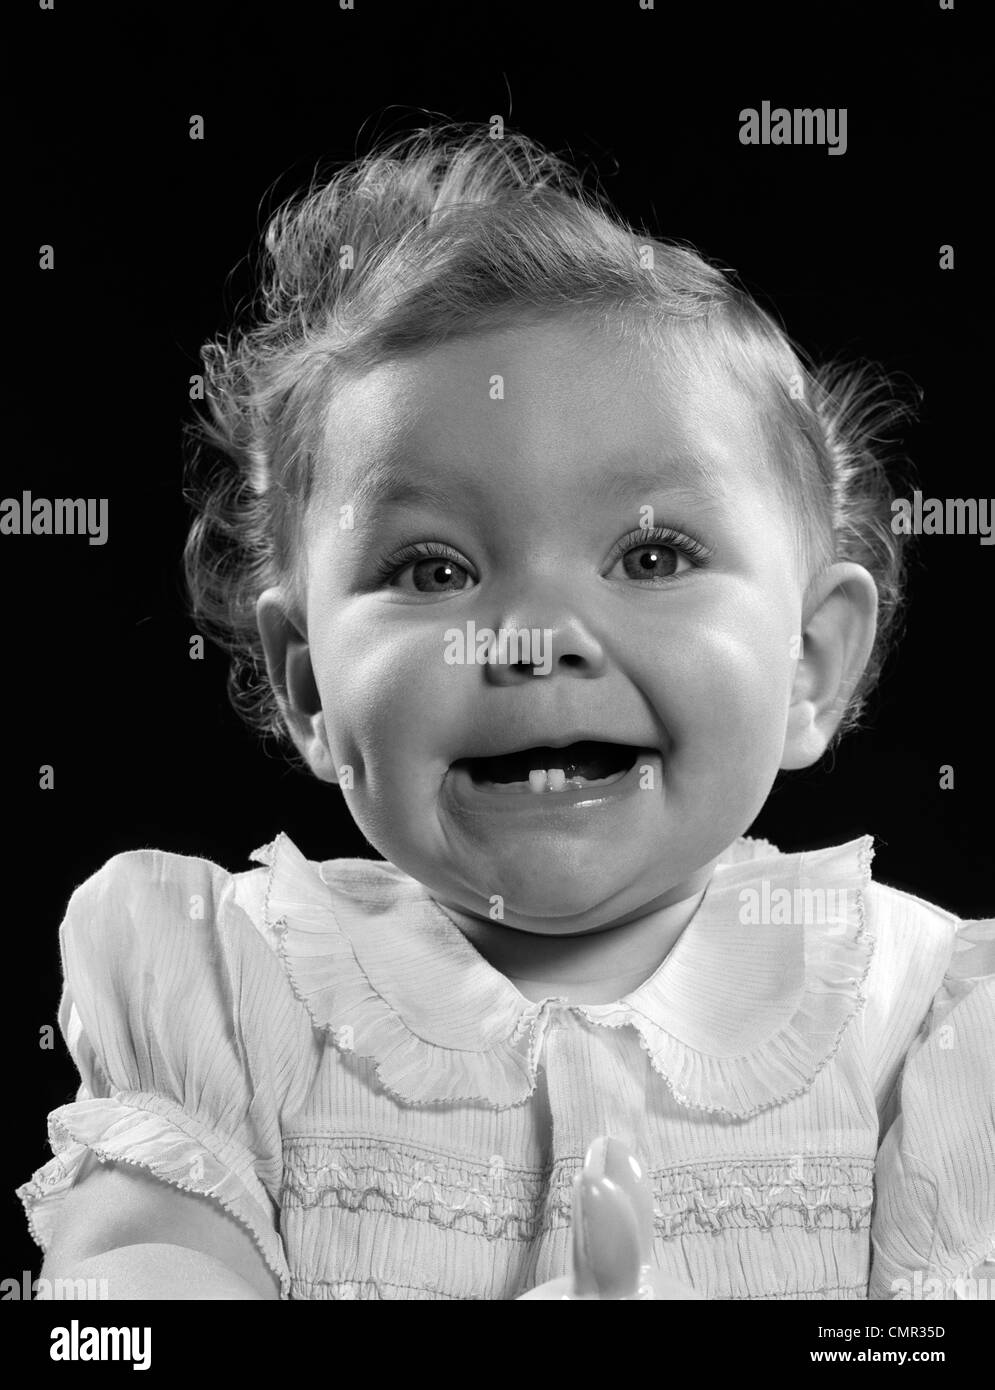 1950s PORTRAIT BABY GIRL SMILING WITH TWO BOTTOM TEETH SHOWING LOOKING AT CAMERA Stock Photo